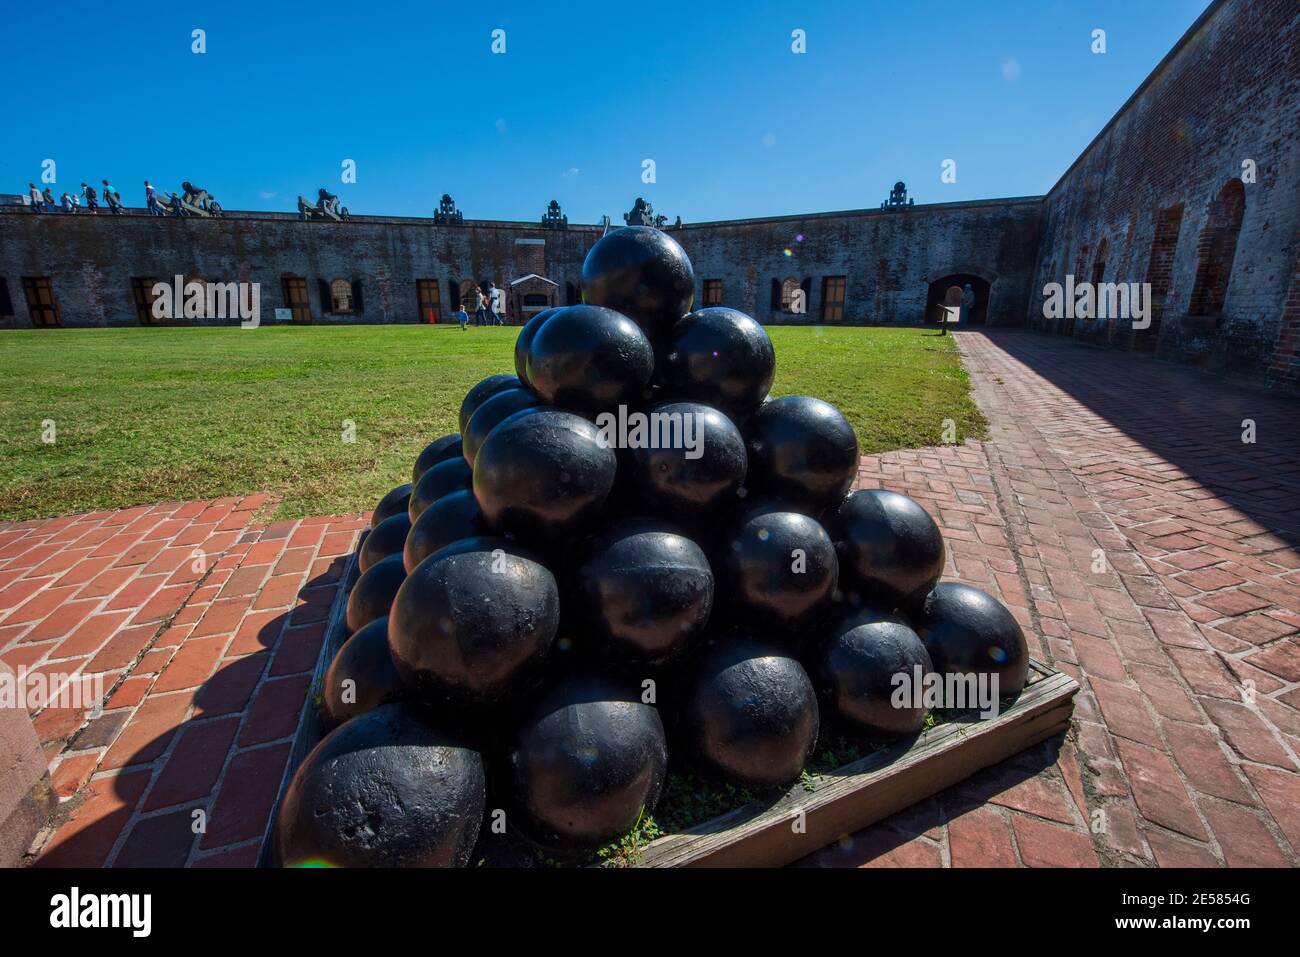 A pyramid of cannonballs at Fort Macon State Park in Atlantic Beach, NC. Fort Macon was constructed after the War of 1812 to defend Beaufort Harbor. T Stock Photo